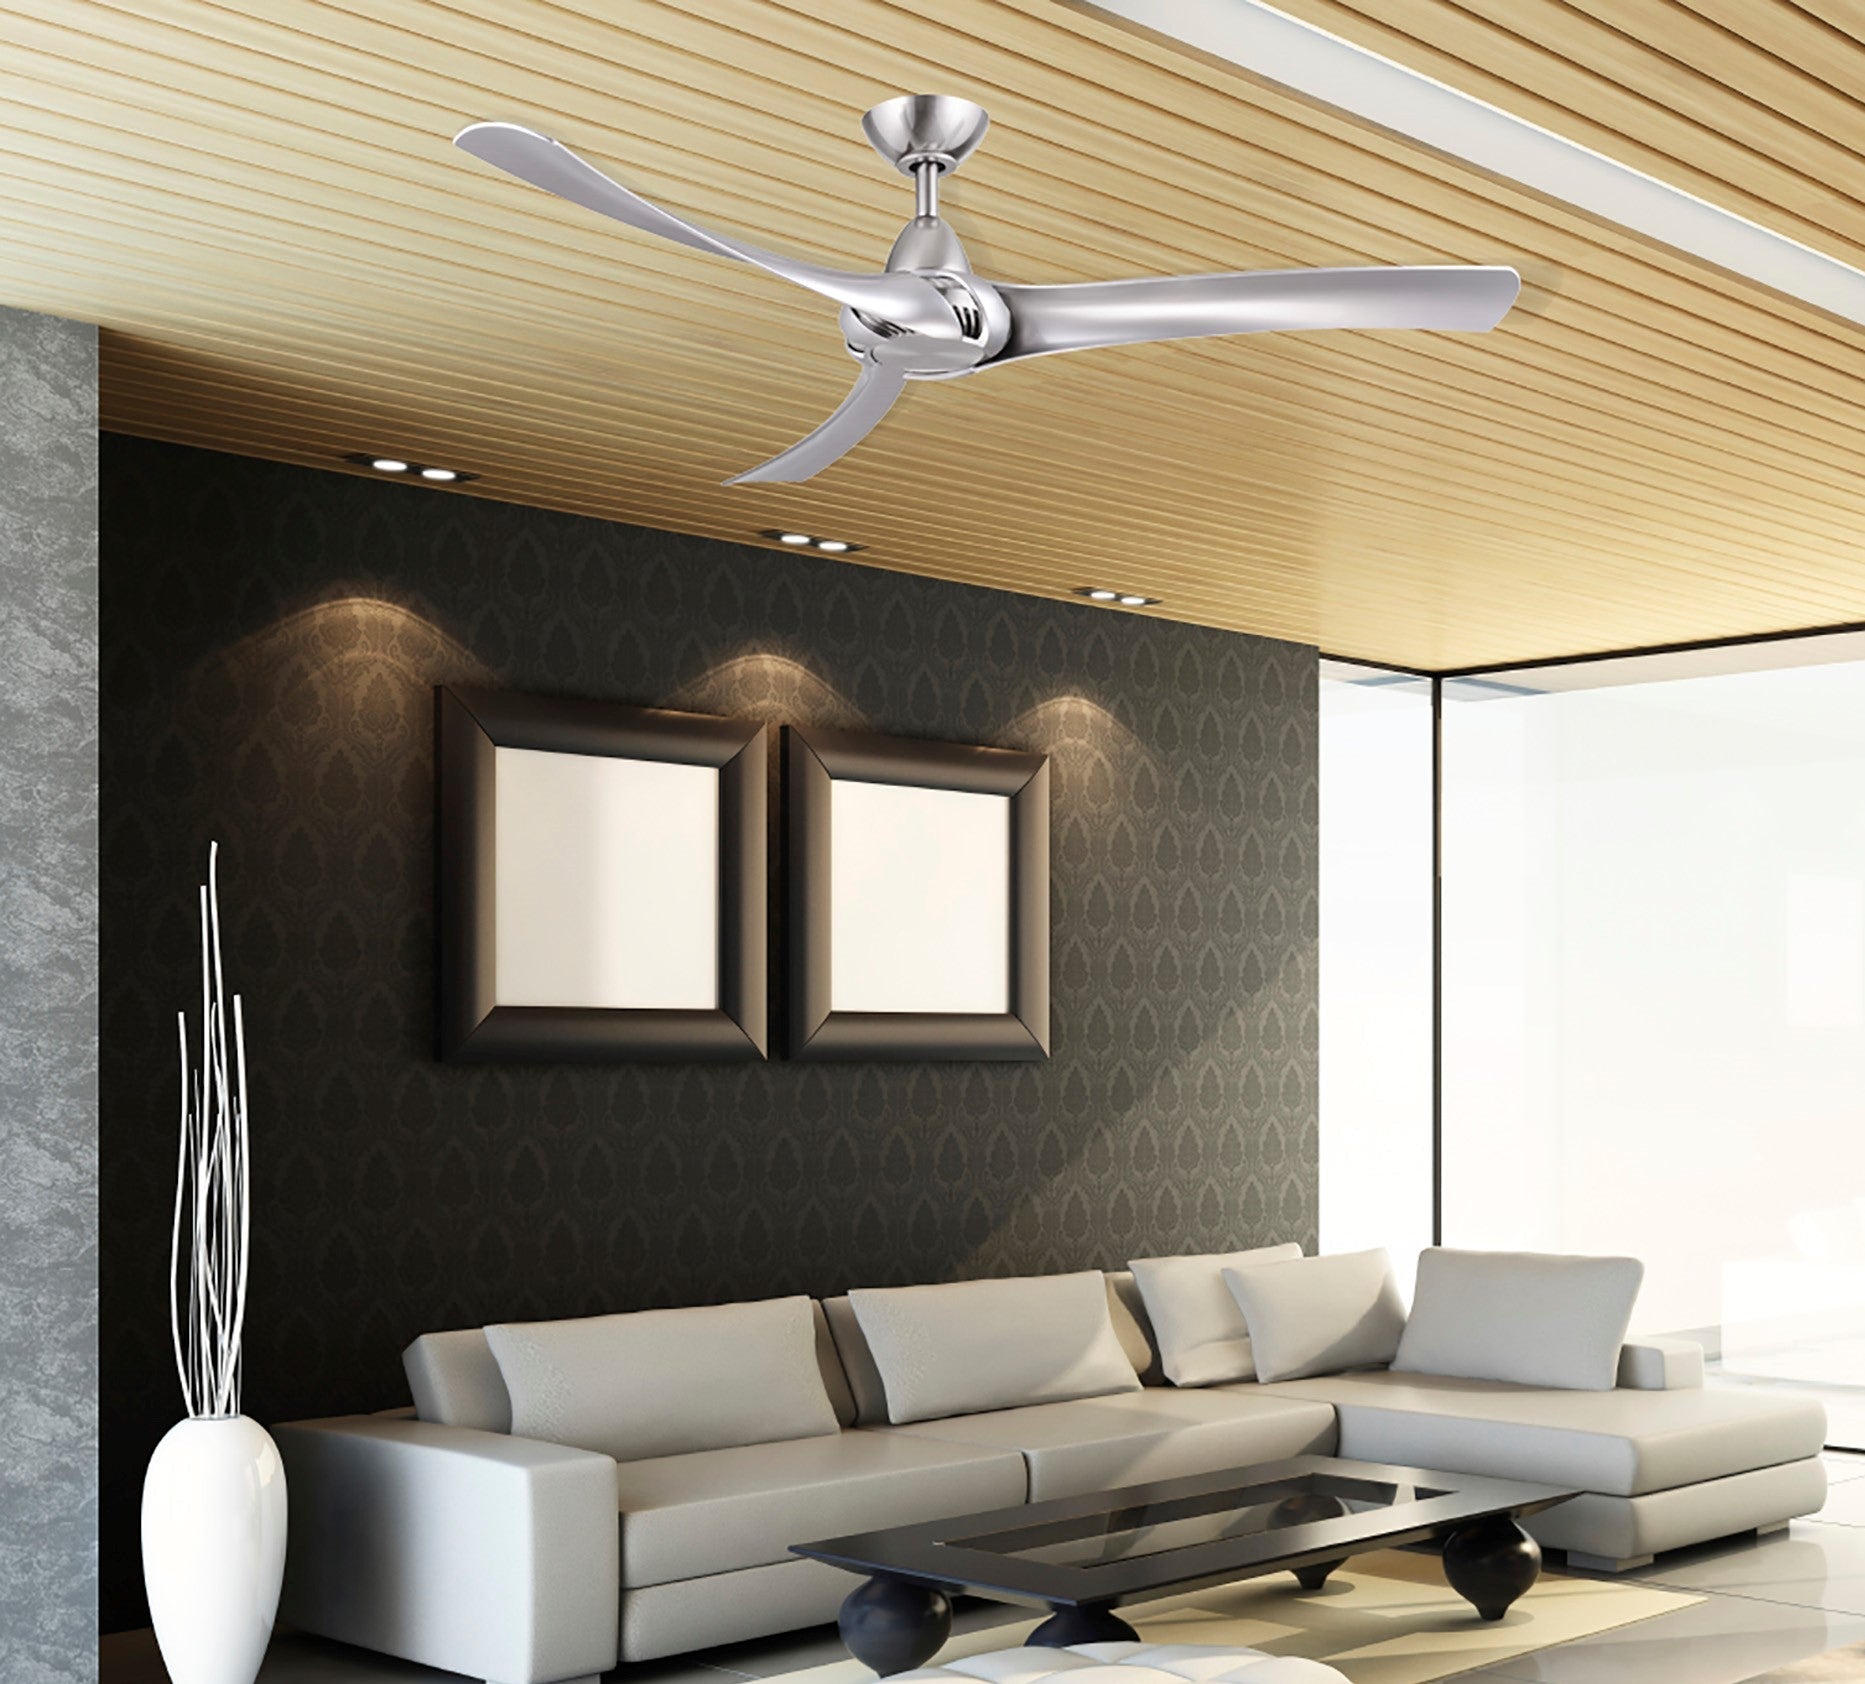 How to install a ceiling fan remote